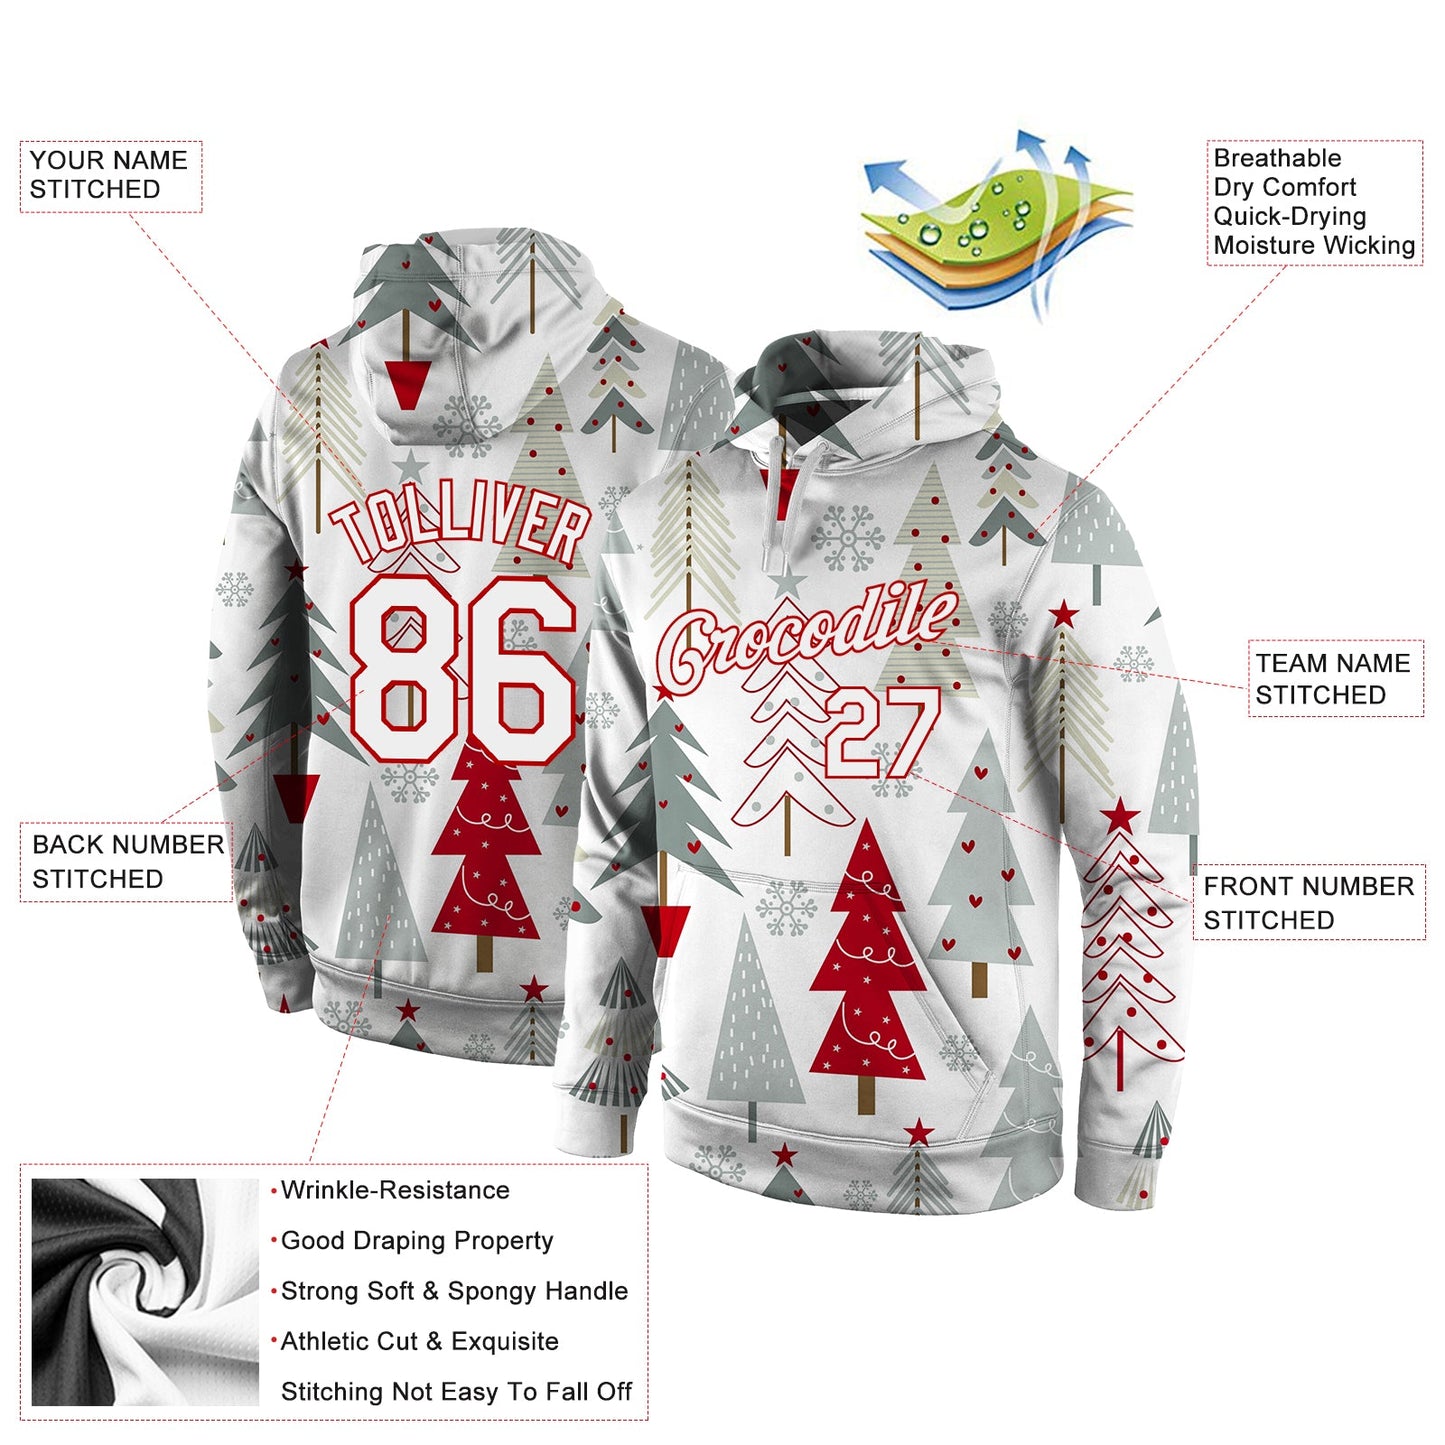 Custom Stitched Gray White-Red Christmas 3D Sports Pullover Sweatshirt Hoodie